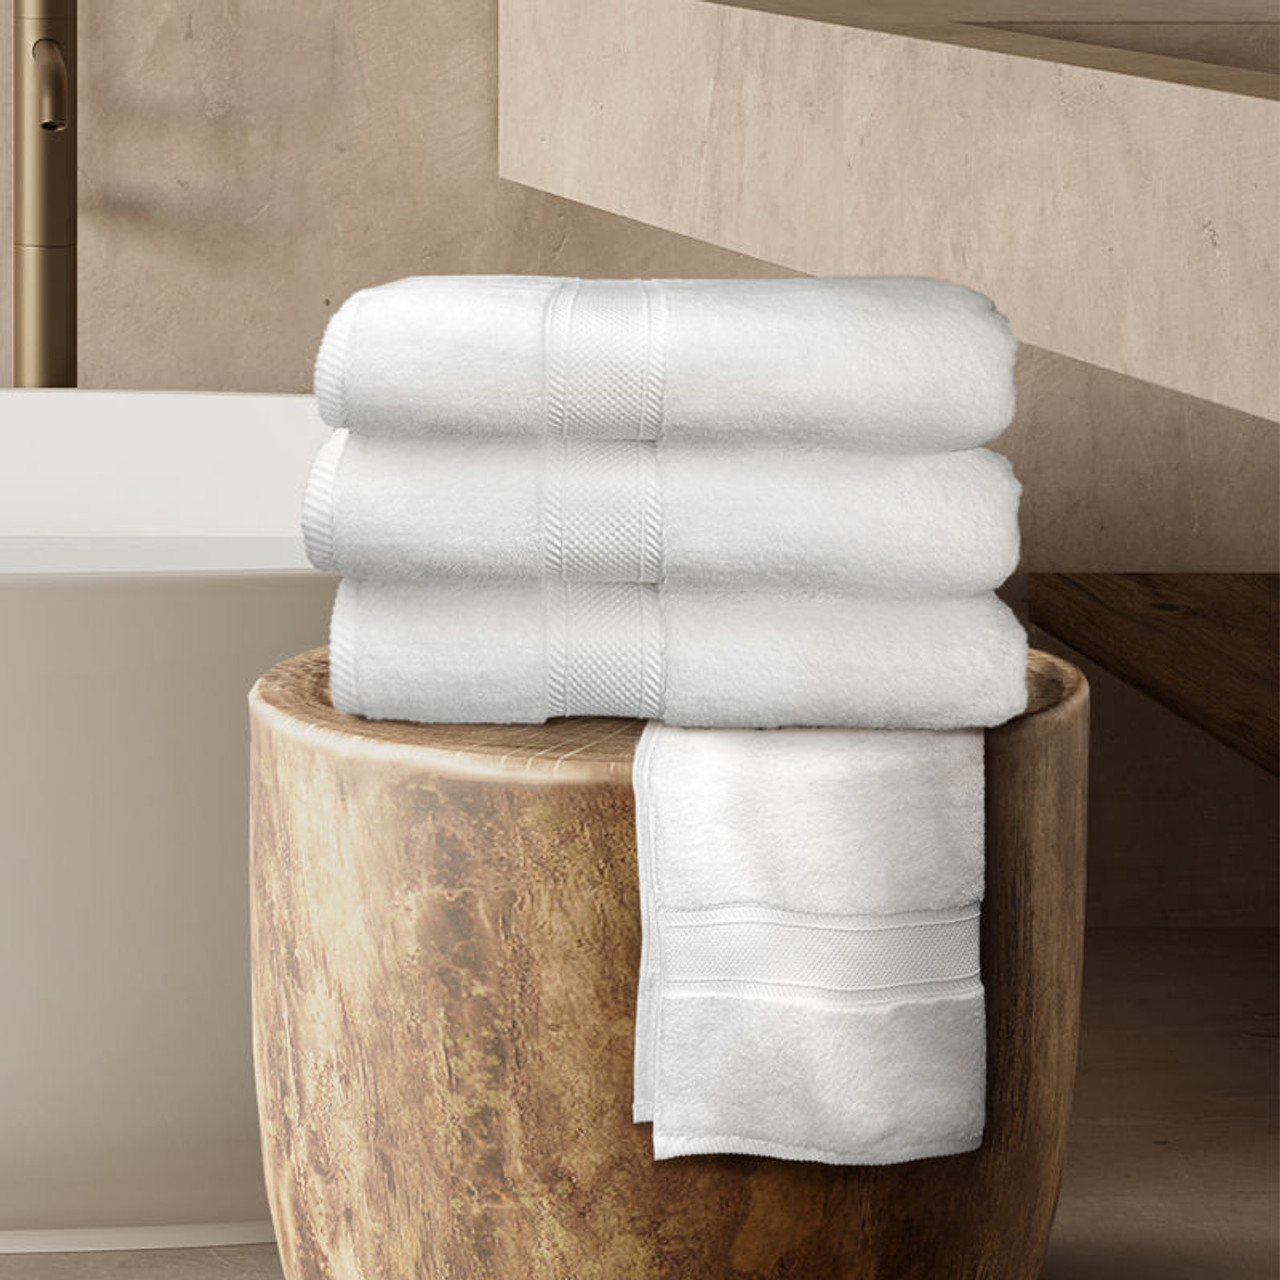 Three white bath mats neatly folded on top of a fourth mat, draped over a wooden stool